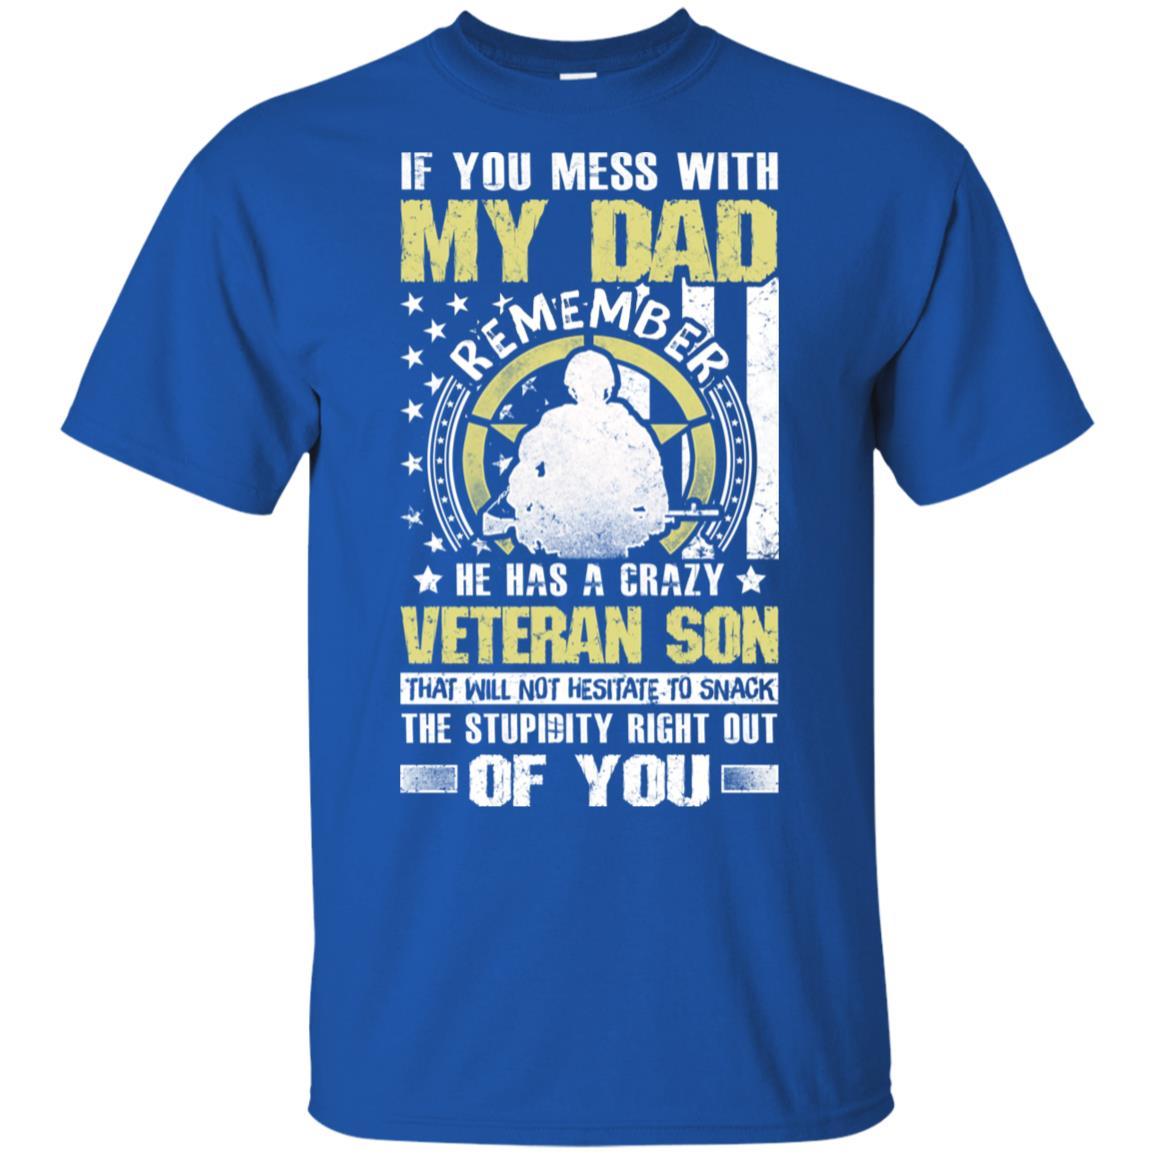 Military T-Shirt "If You Mess With My Dad Remember He Has A Crazy Veteran Son That Will Not Hesitate To Snack The Stupidity Right Out Of You On" Front-TShirt-General-Veterans Nation